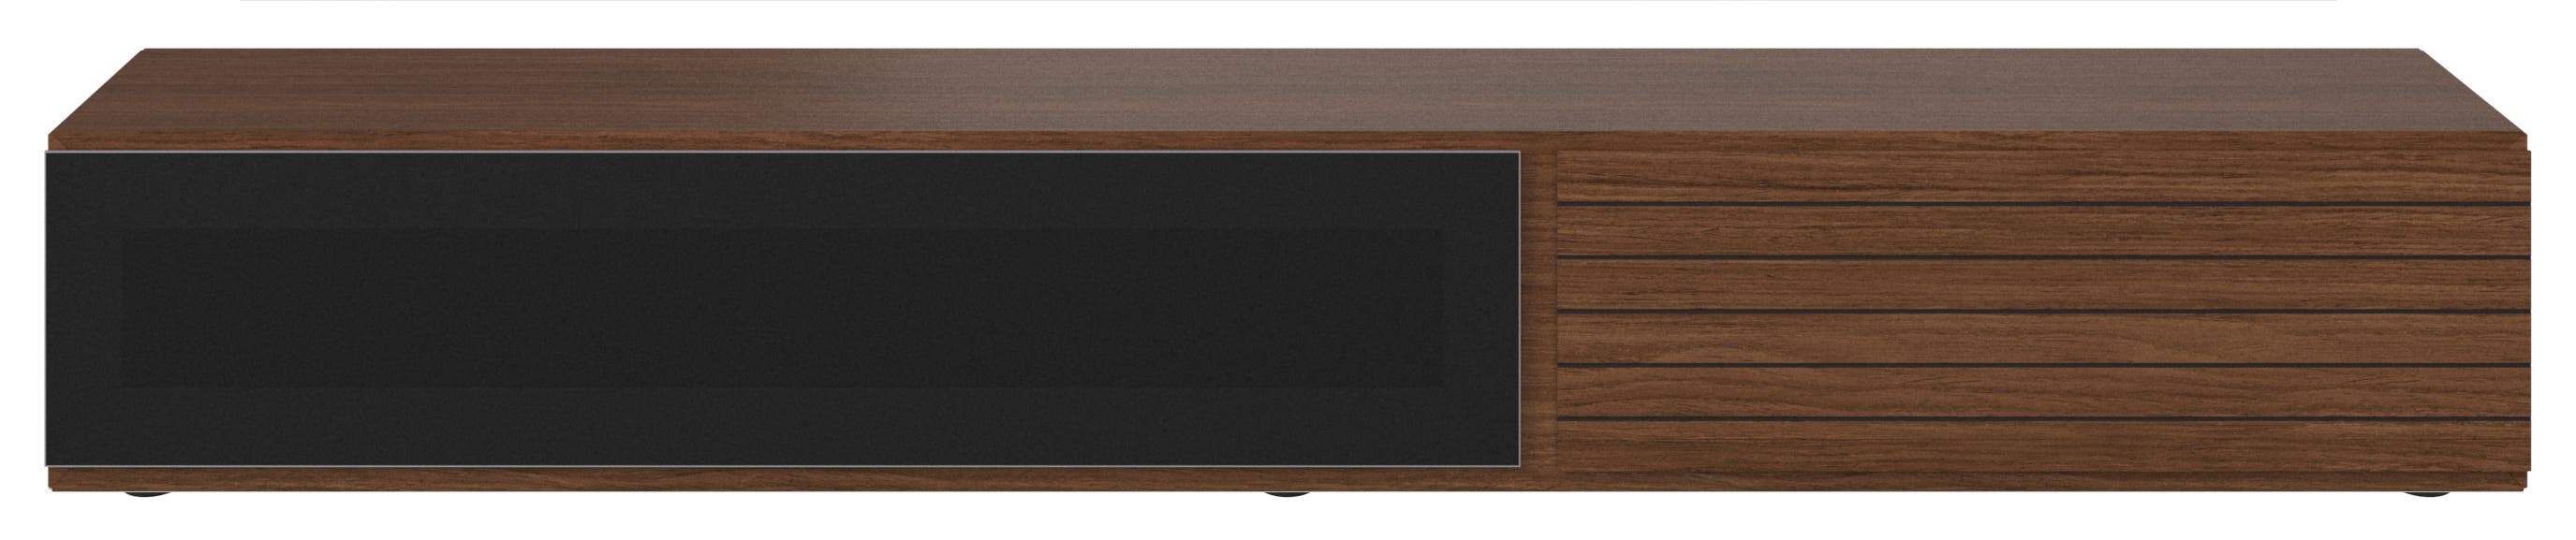 Lugano base cabinet with drawer and drop down door